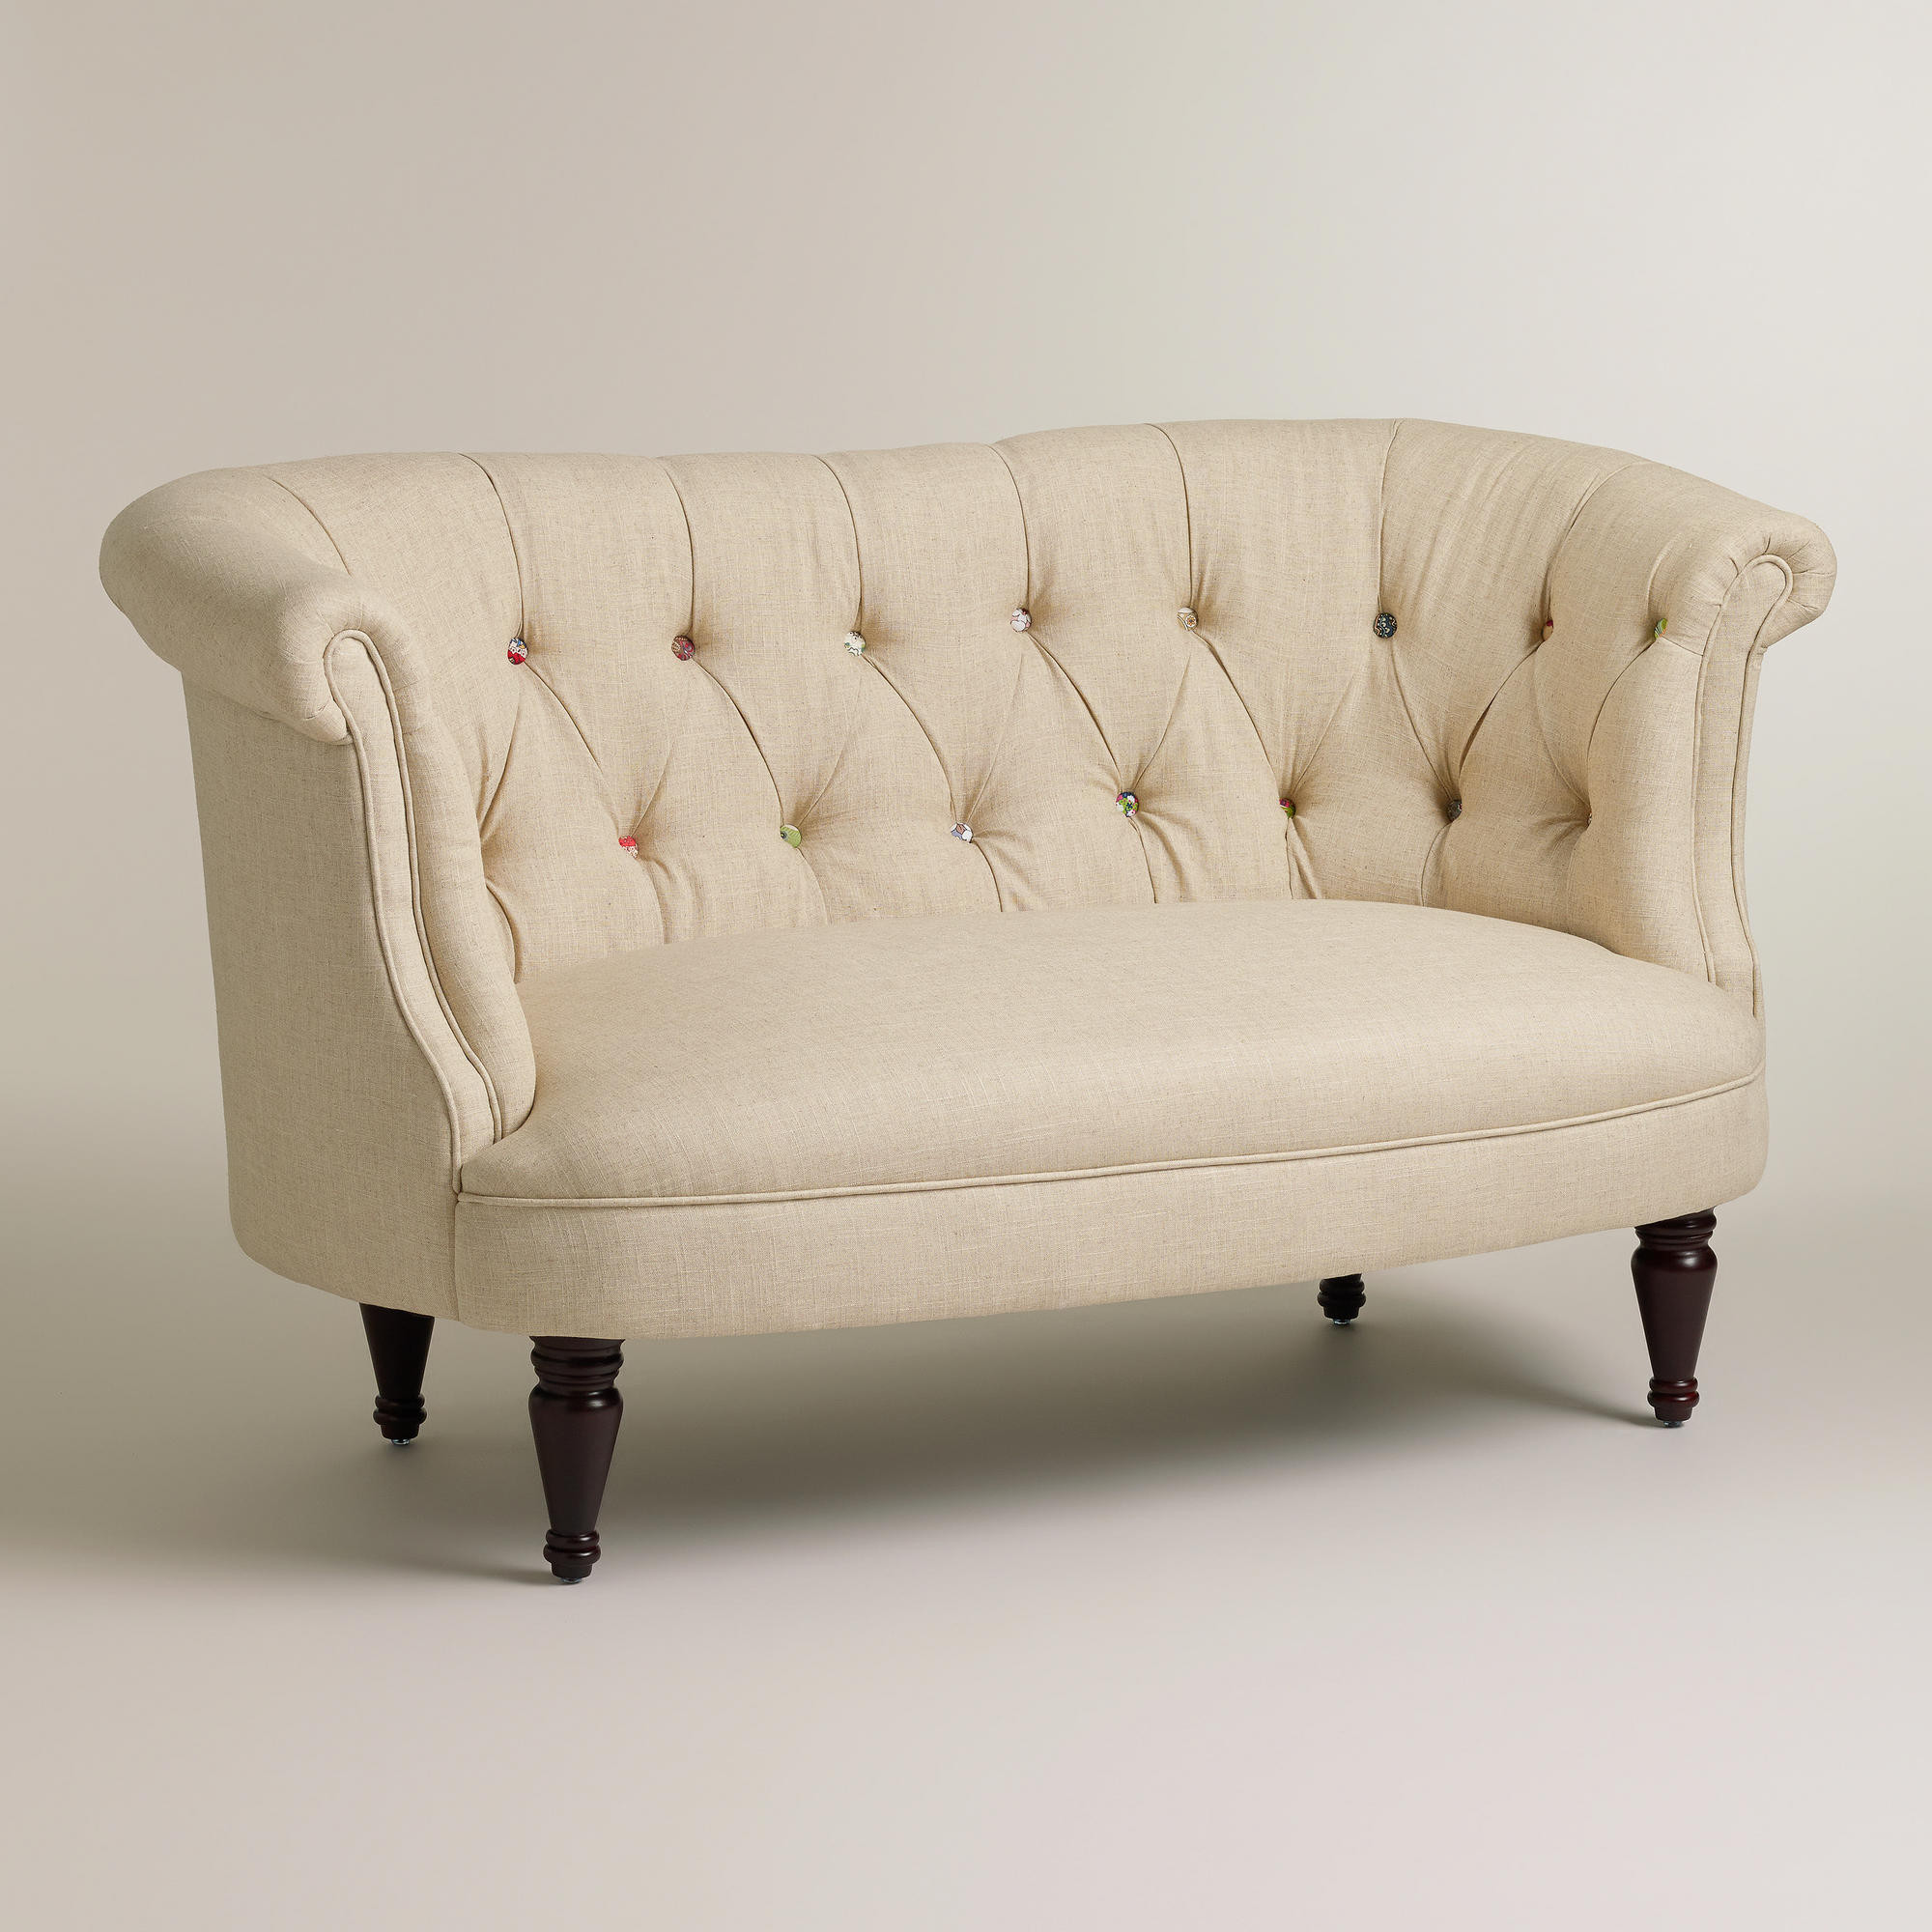 Small Loveseat For Bedroom
 Cheap Loveseats For Small Spaces